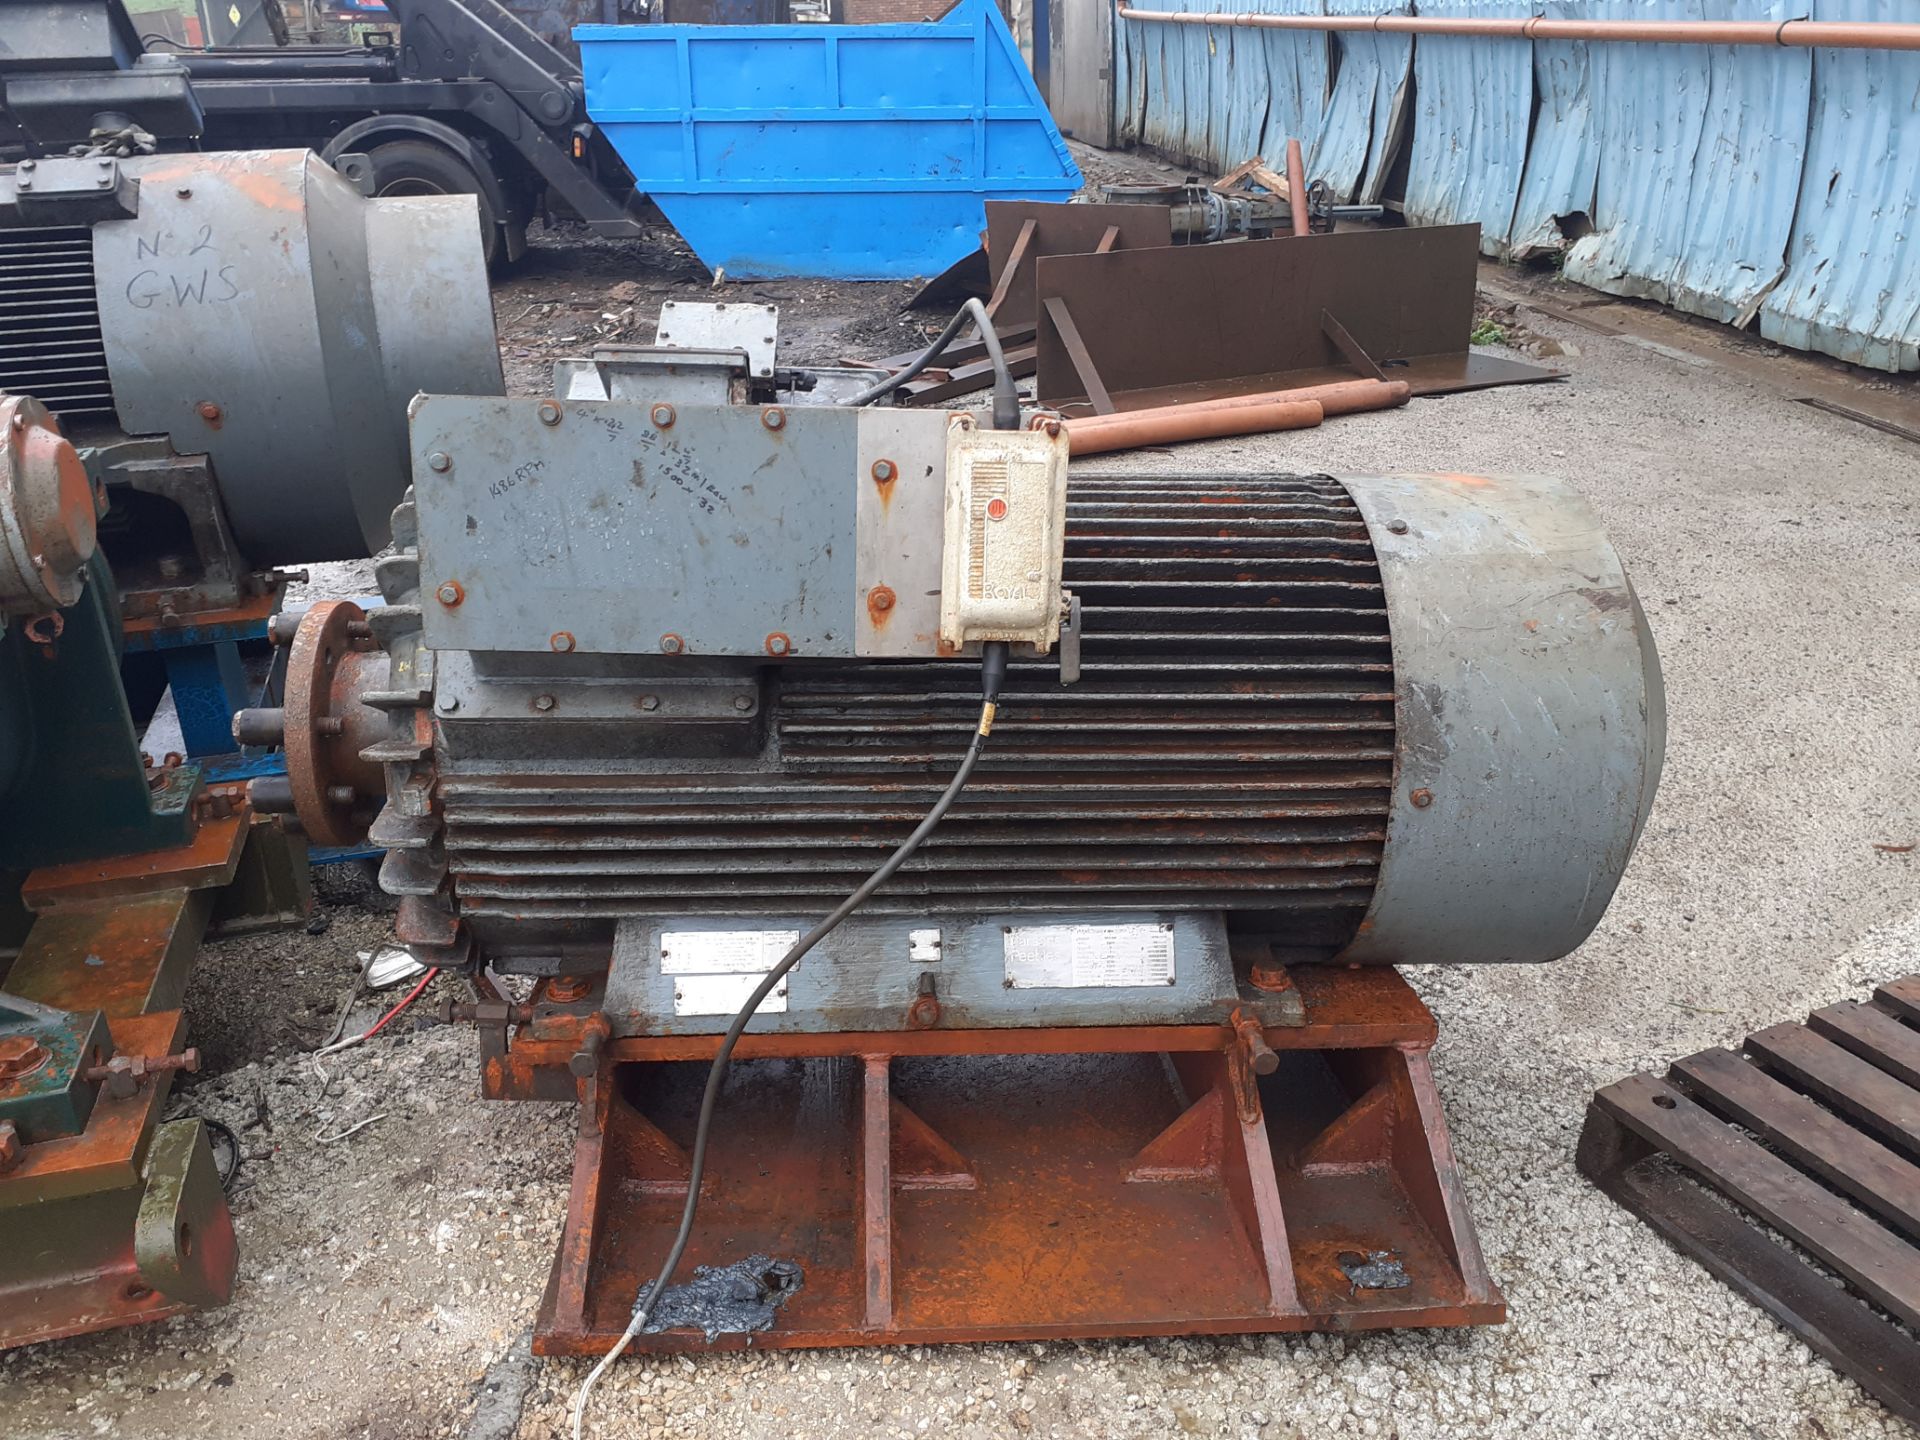 A 1977 Parsons Peebles 300kW 3-Phase Inductional Motor